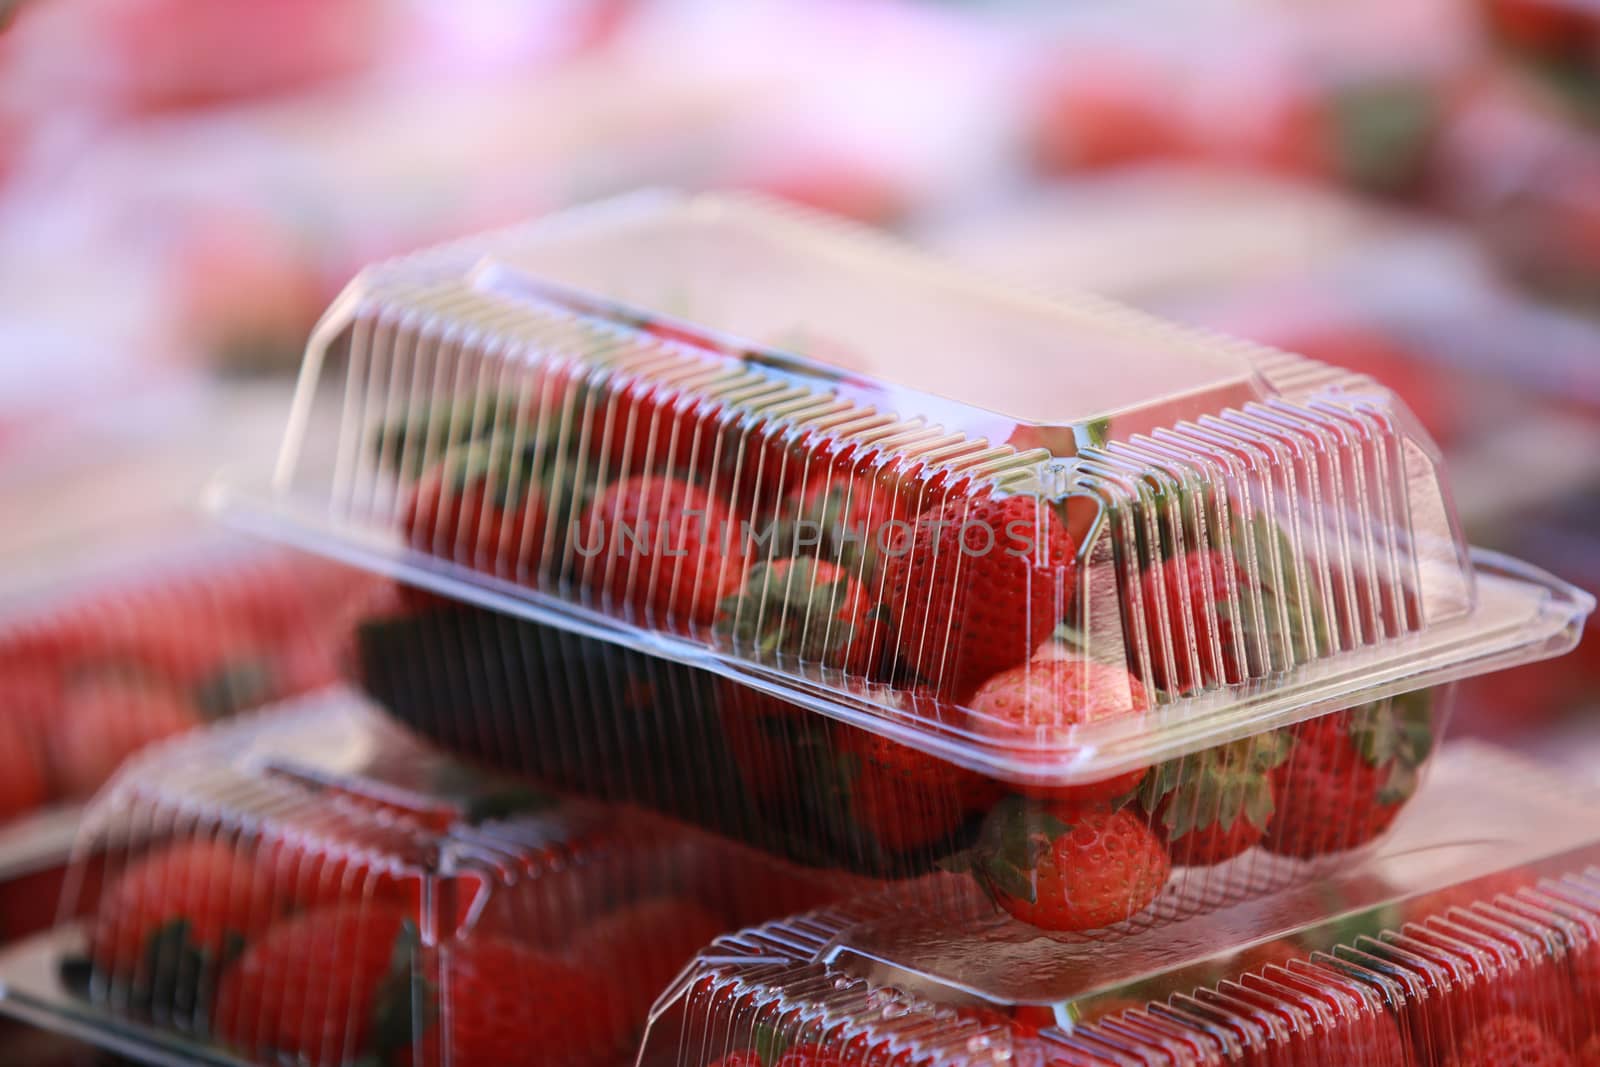 Strawberry in plastic packaging for sell,Concept sell Strawberry in market